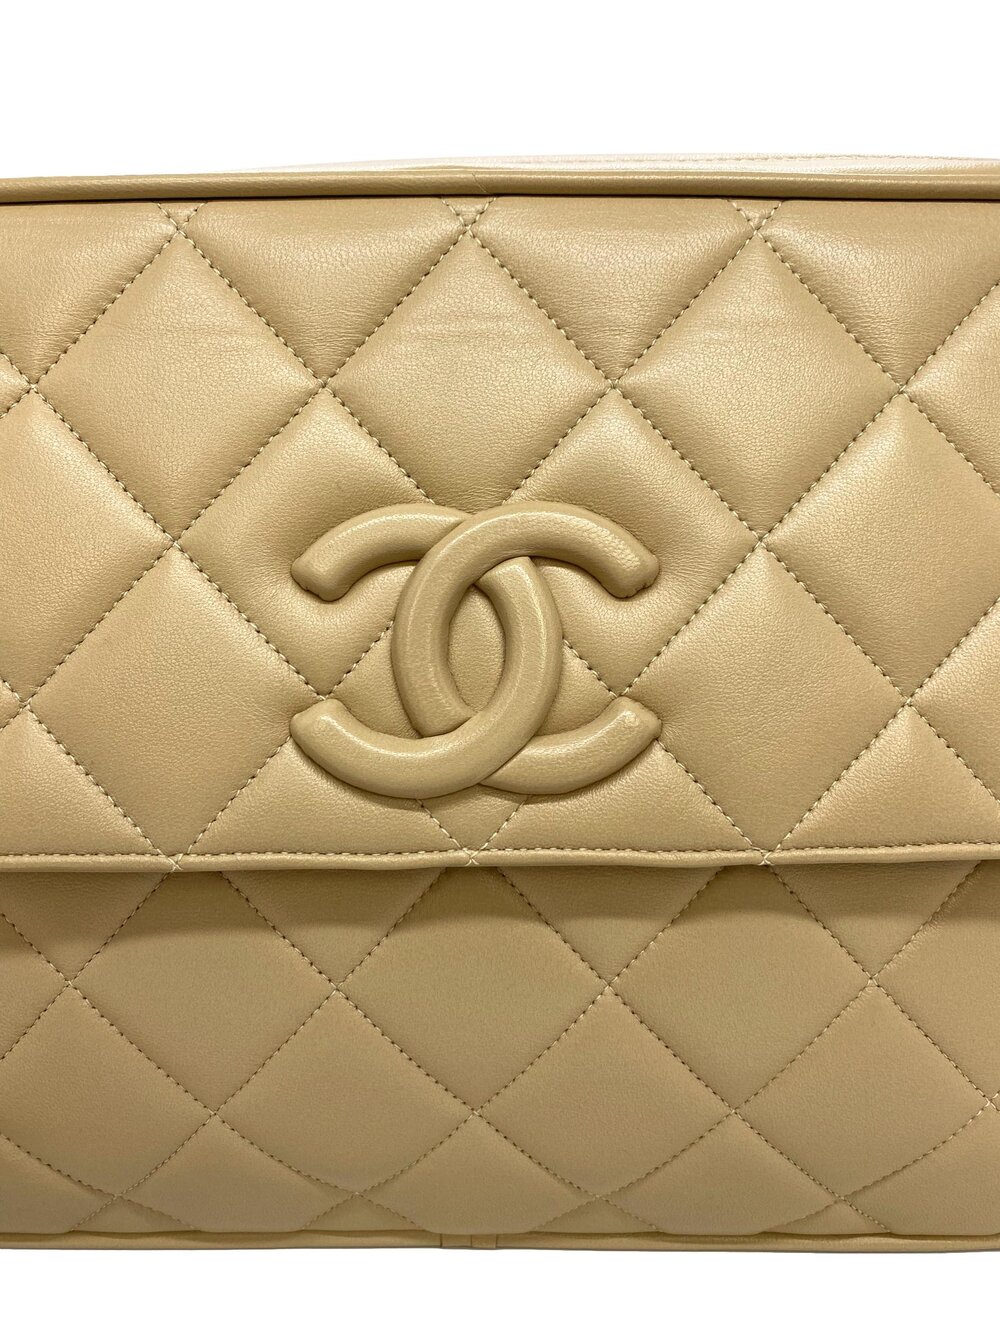 2006 Chanel Khaki Quilted Lambskin Vintage Medium Classic Double Flap Bag